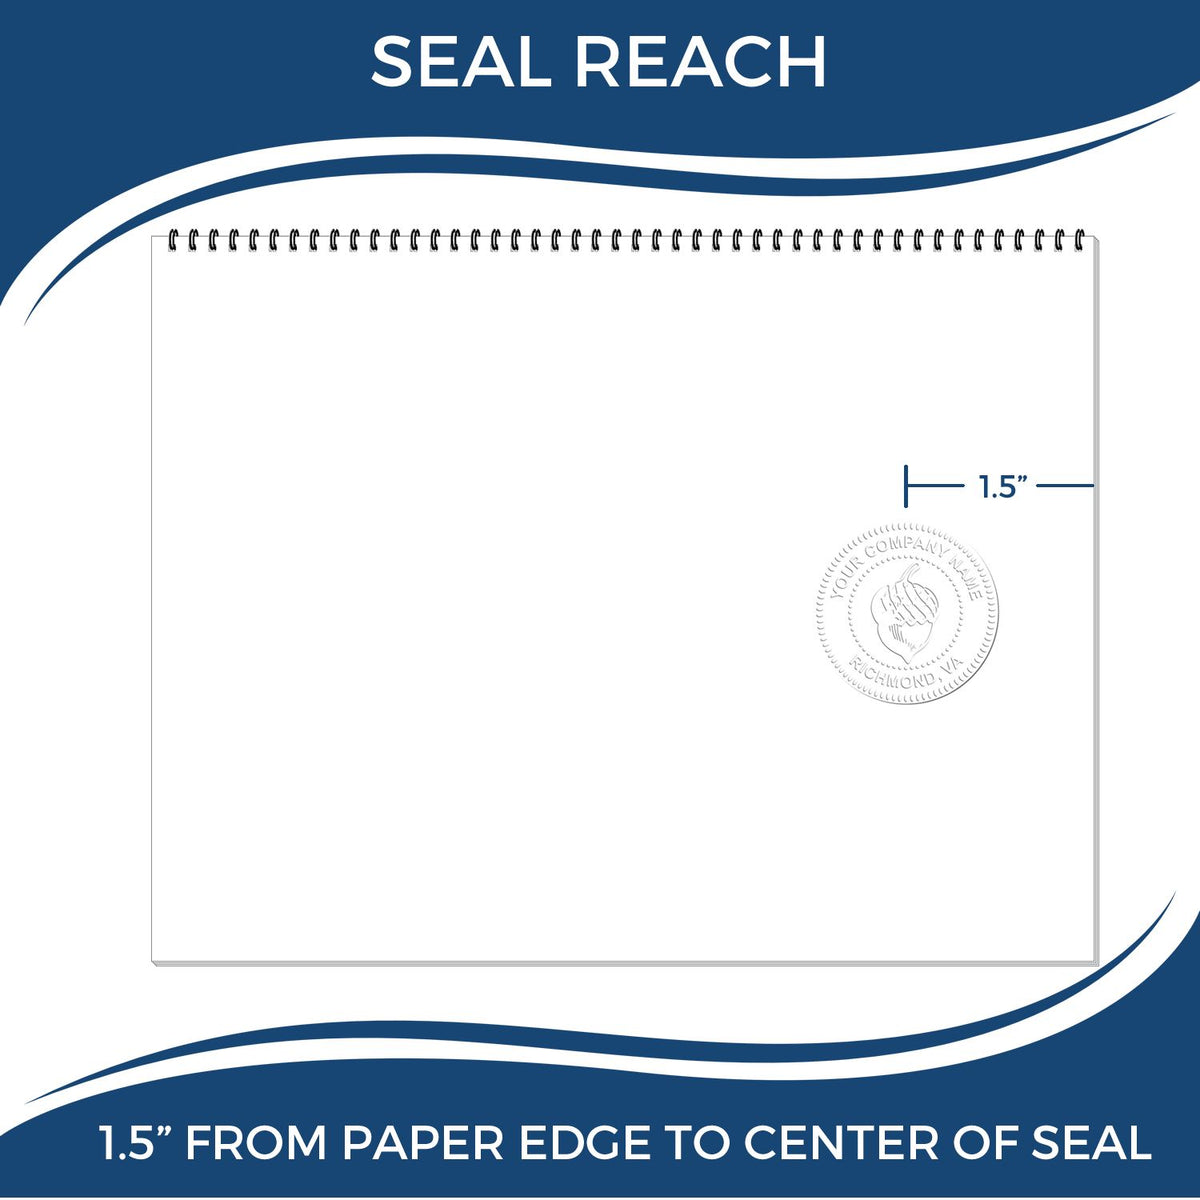 An infographic showing the seal reach which is represented by a ruler and a miniature seal image of the California Engineer Desk Seal